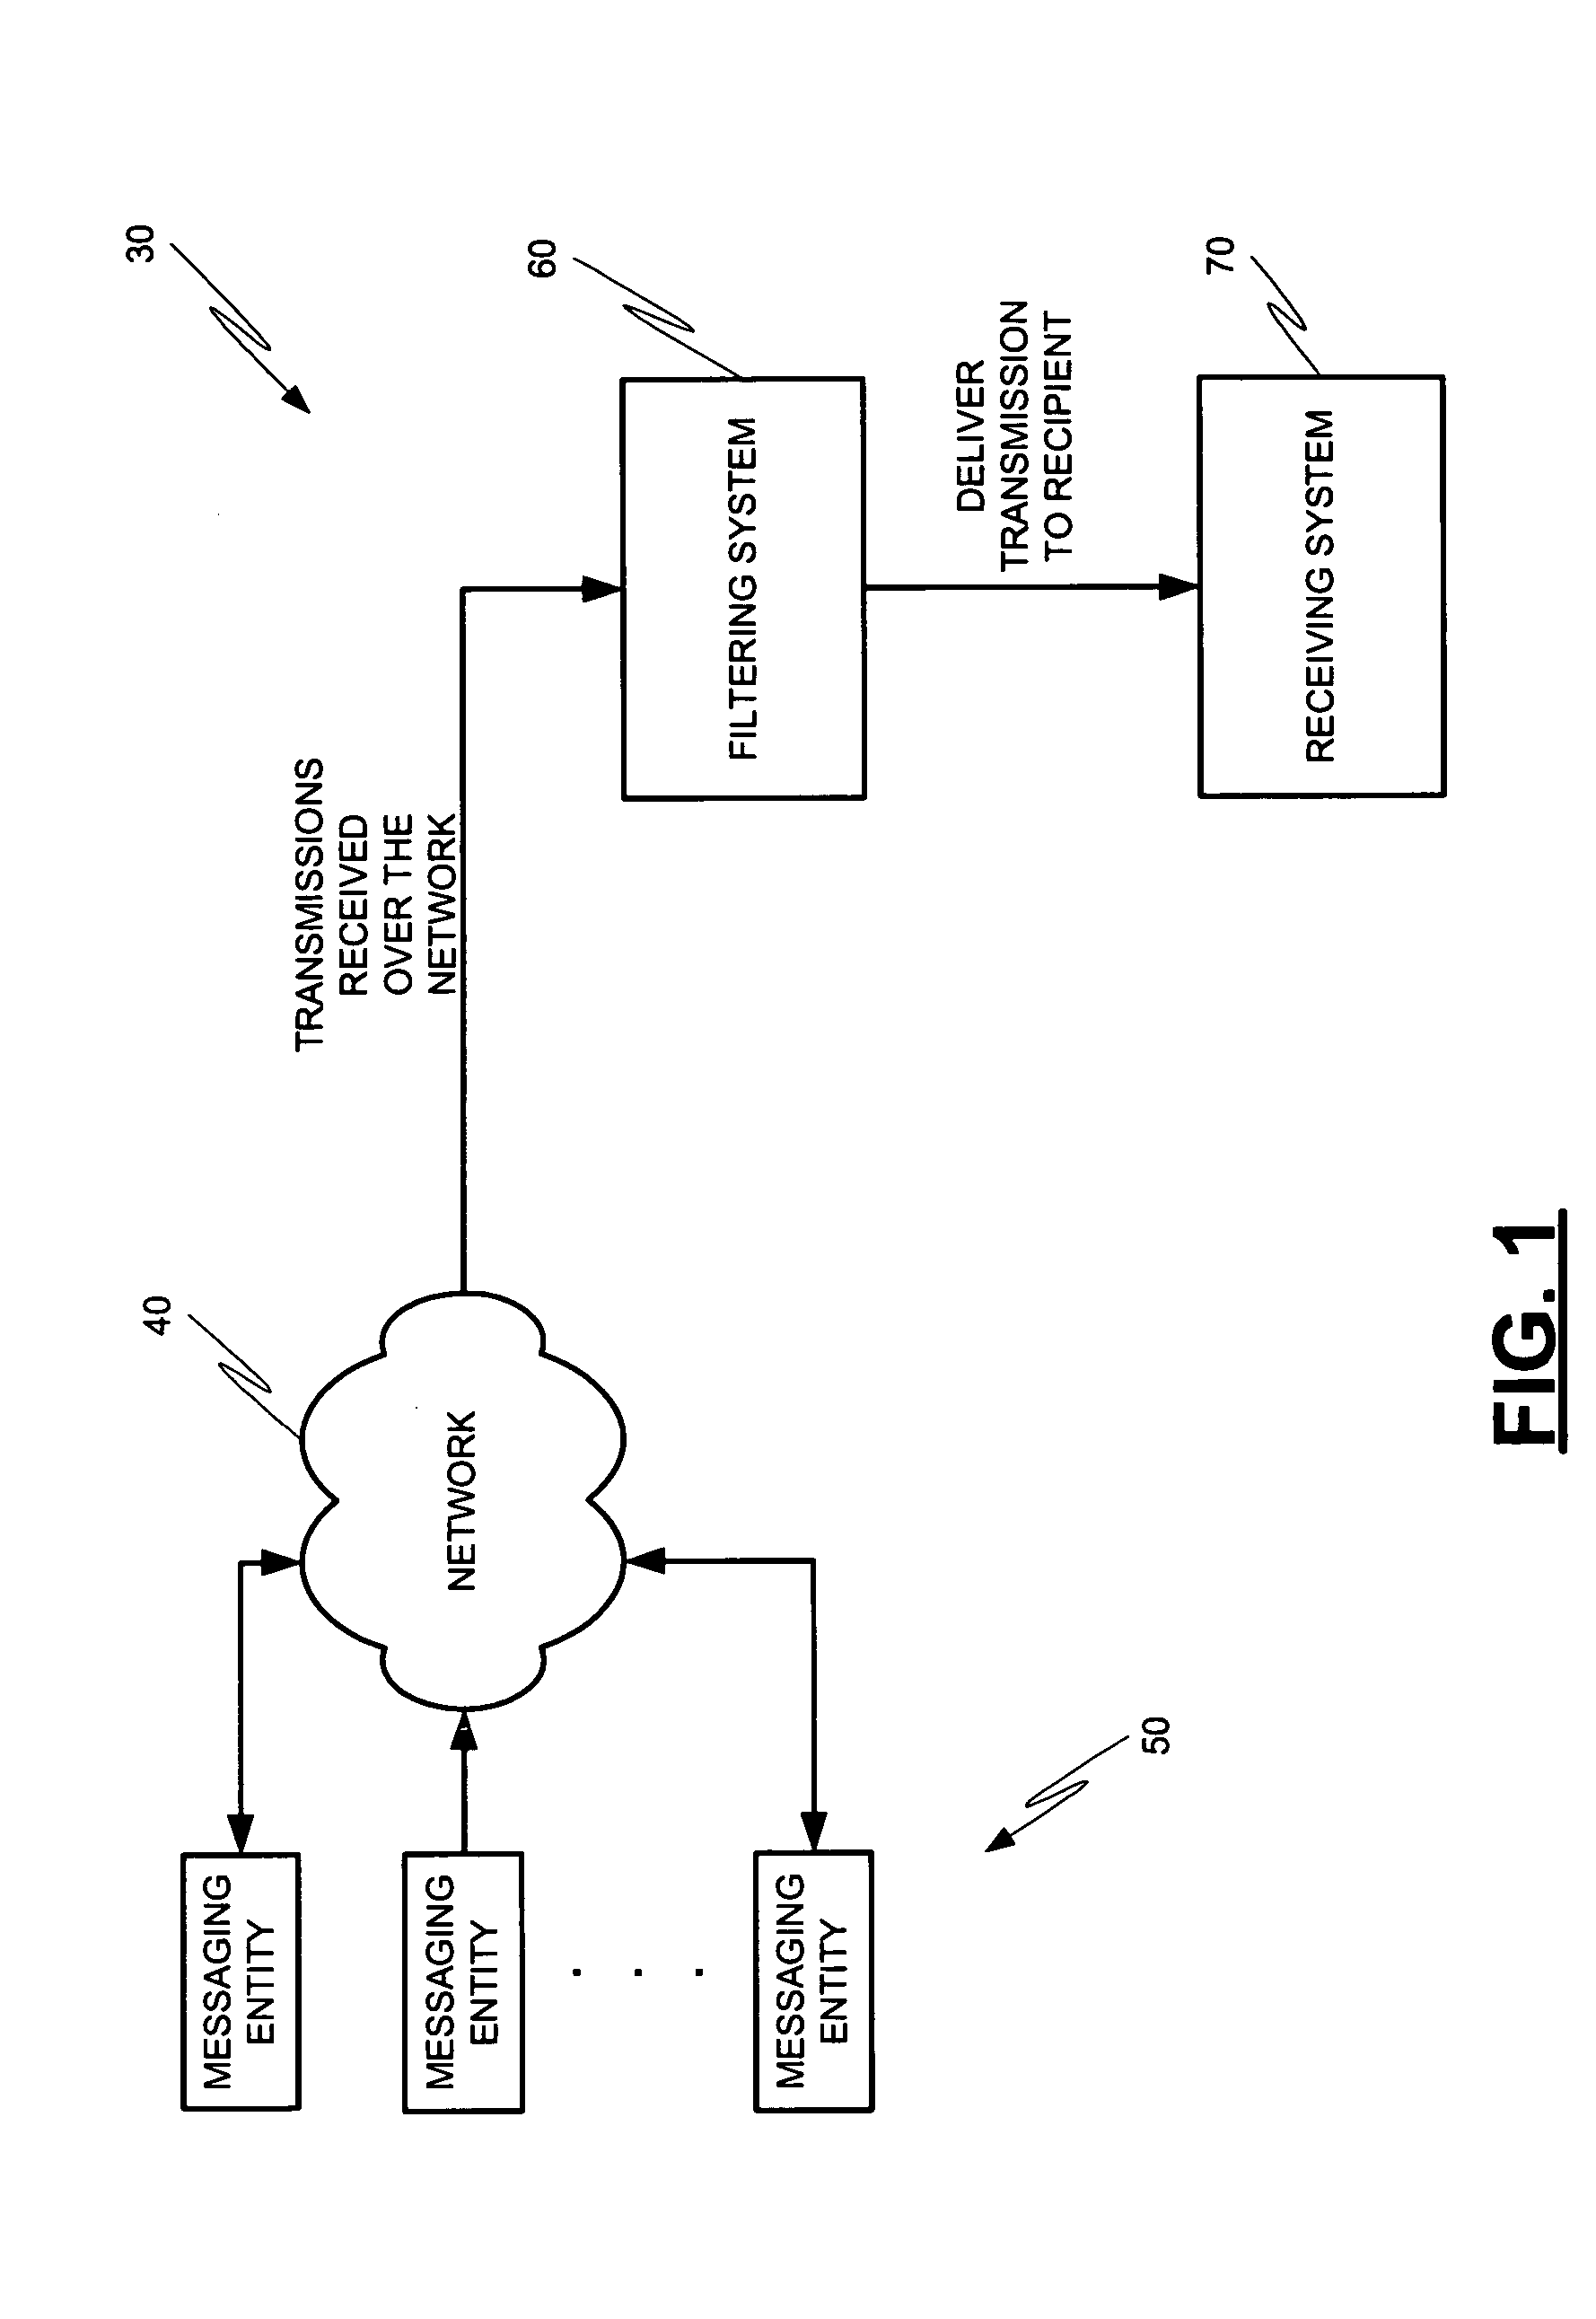 Message profiling systems and methods